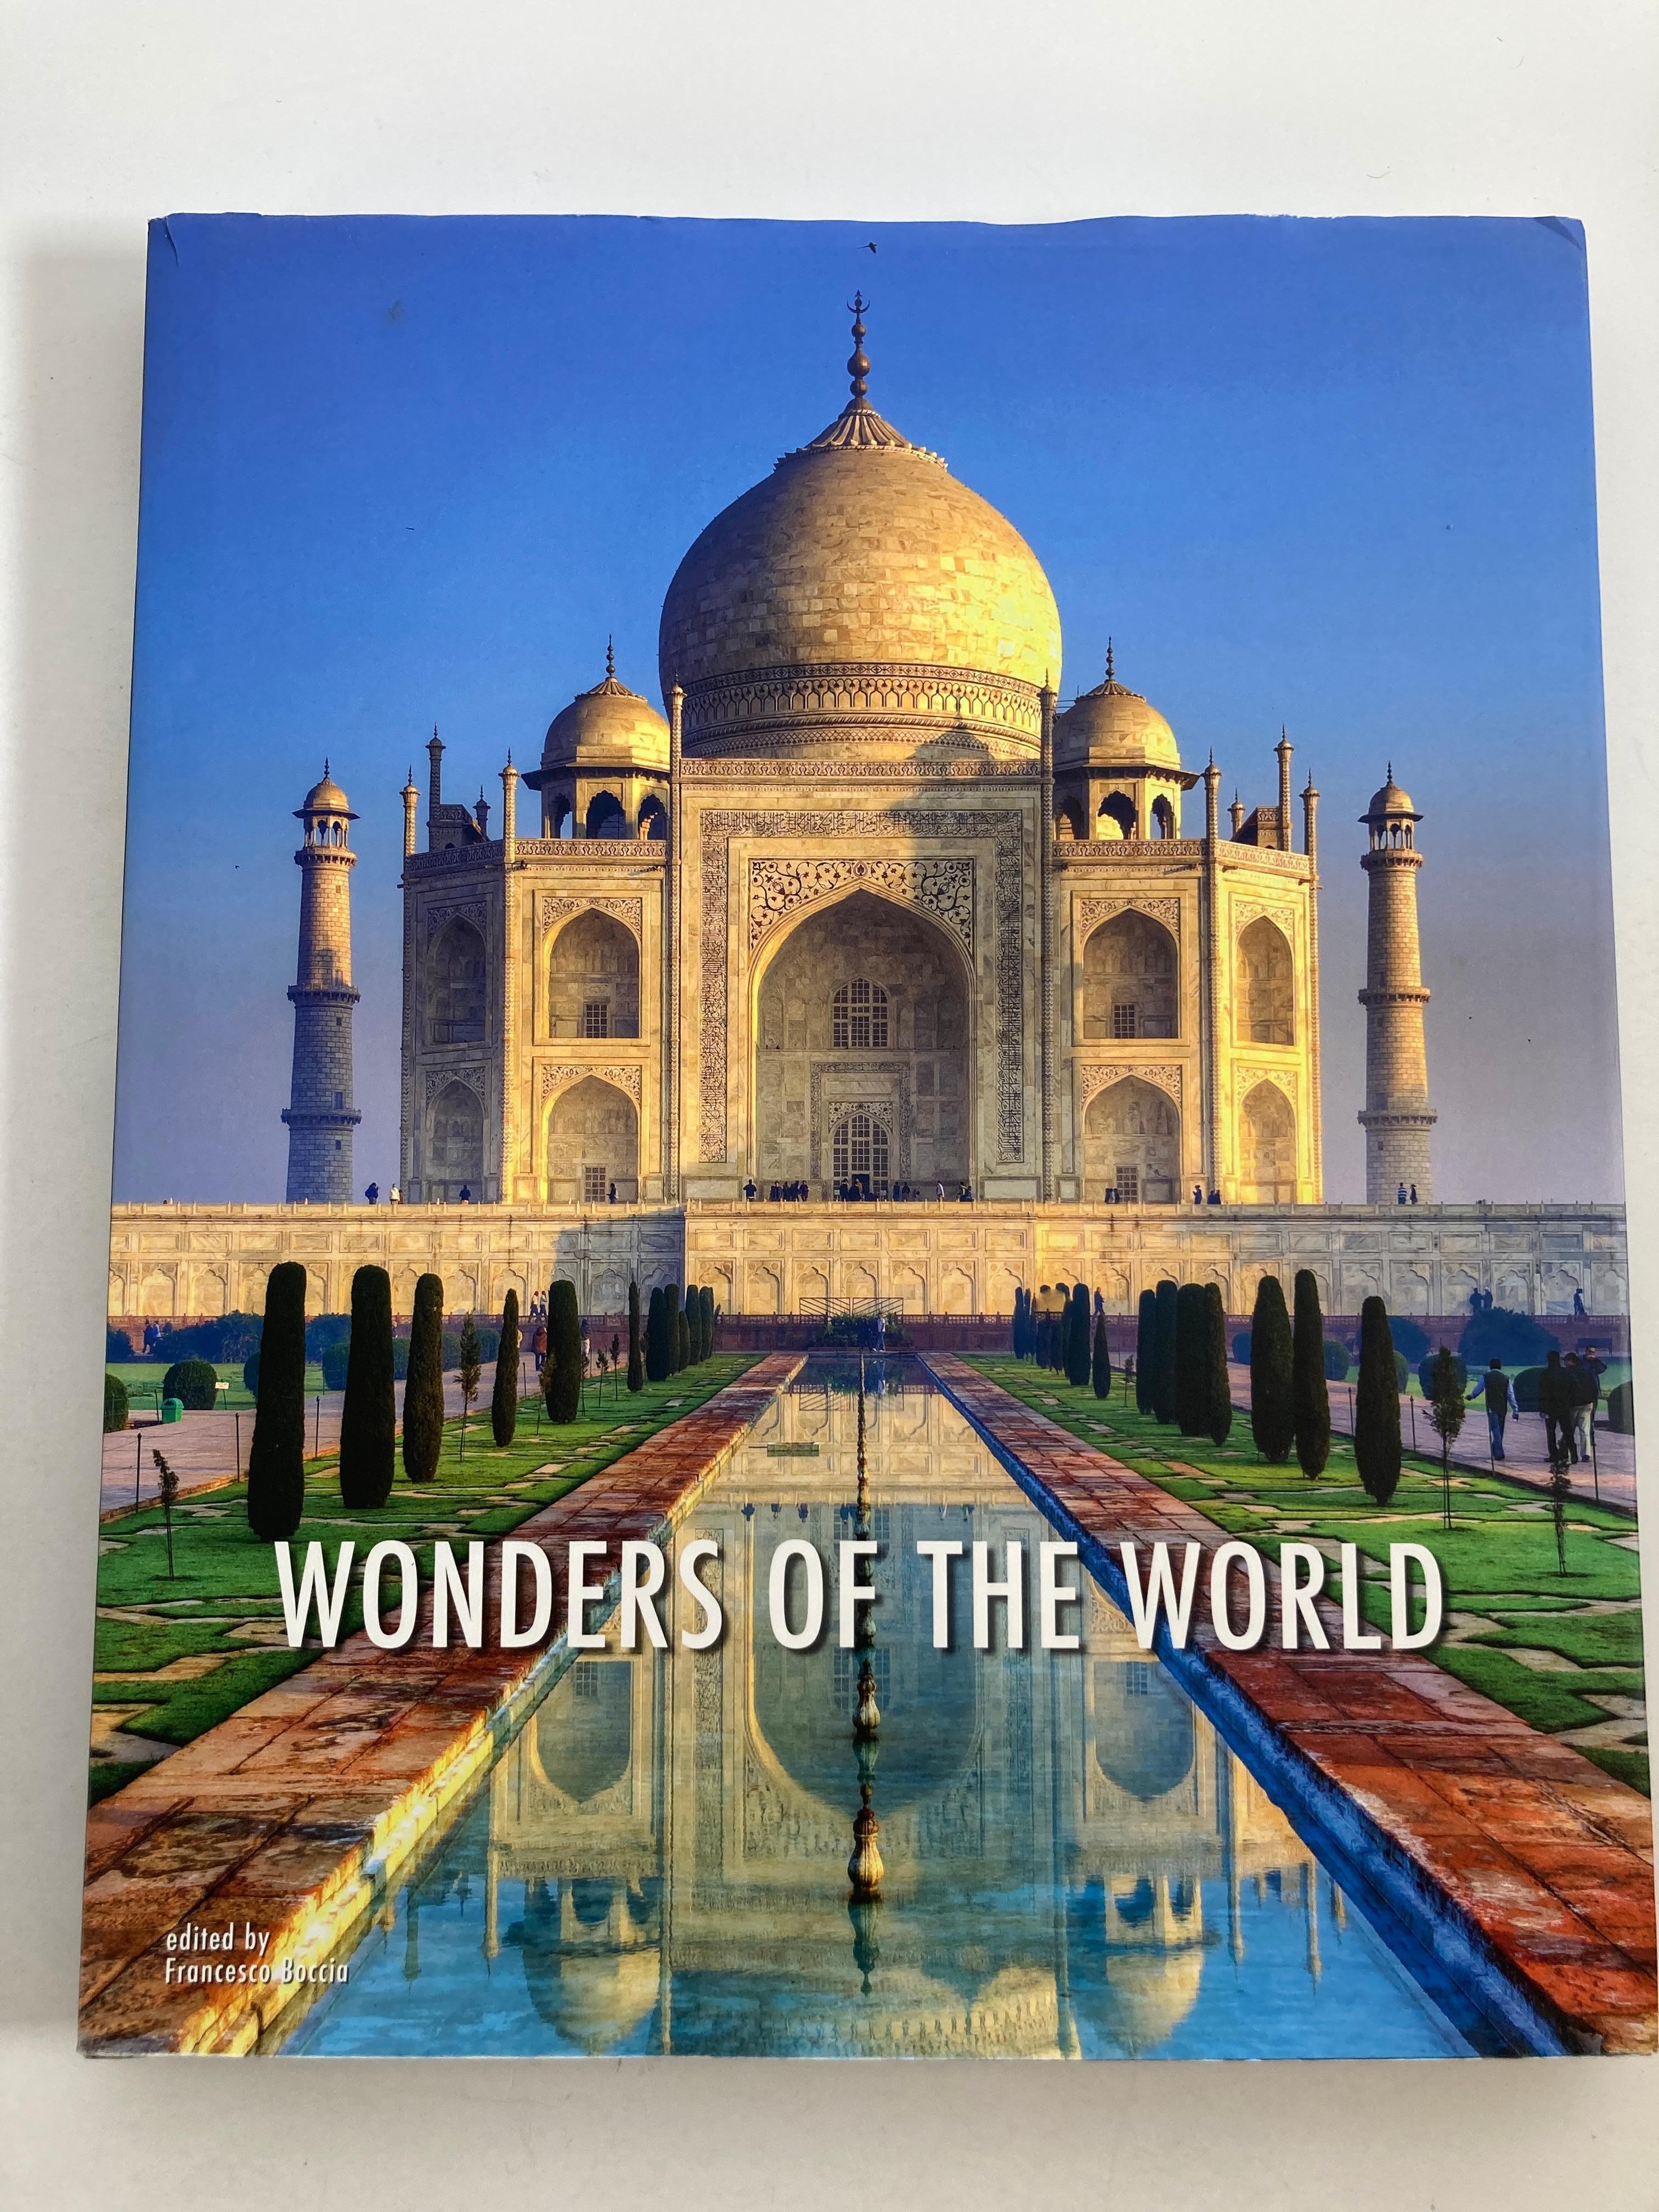 Wonders of the World
This elegant volume with its eye-catching layout presents a selection of some of the most famous structures and monumental works of art of all time.
Featuring stunning photography, Wonders of the World traces the history of